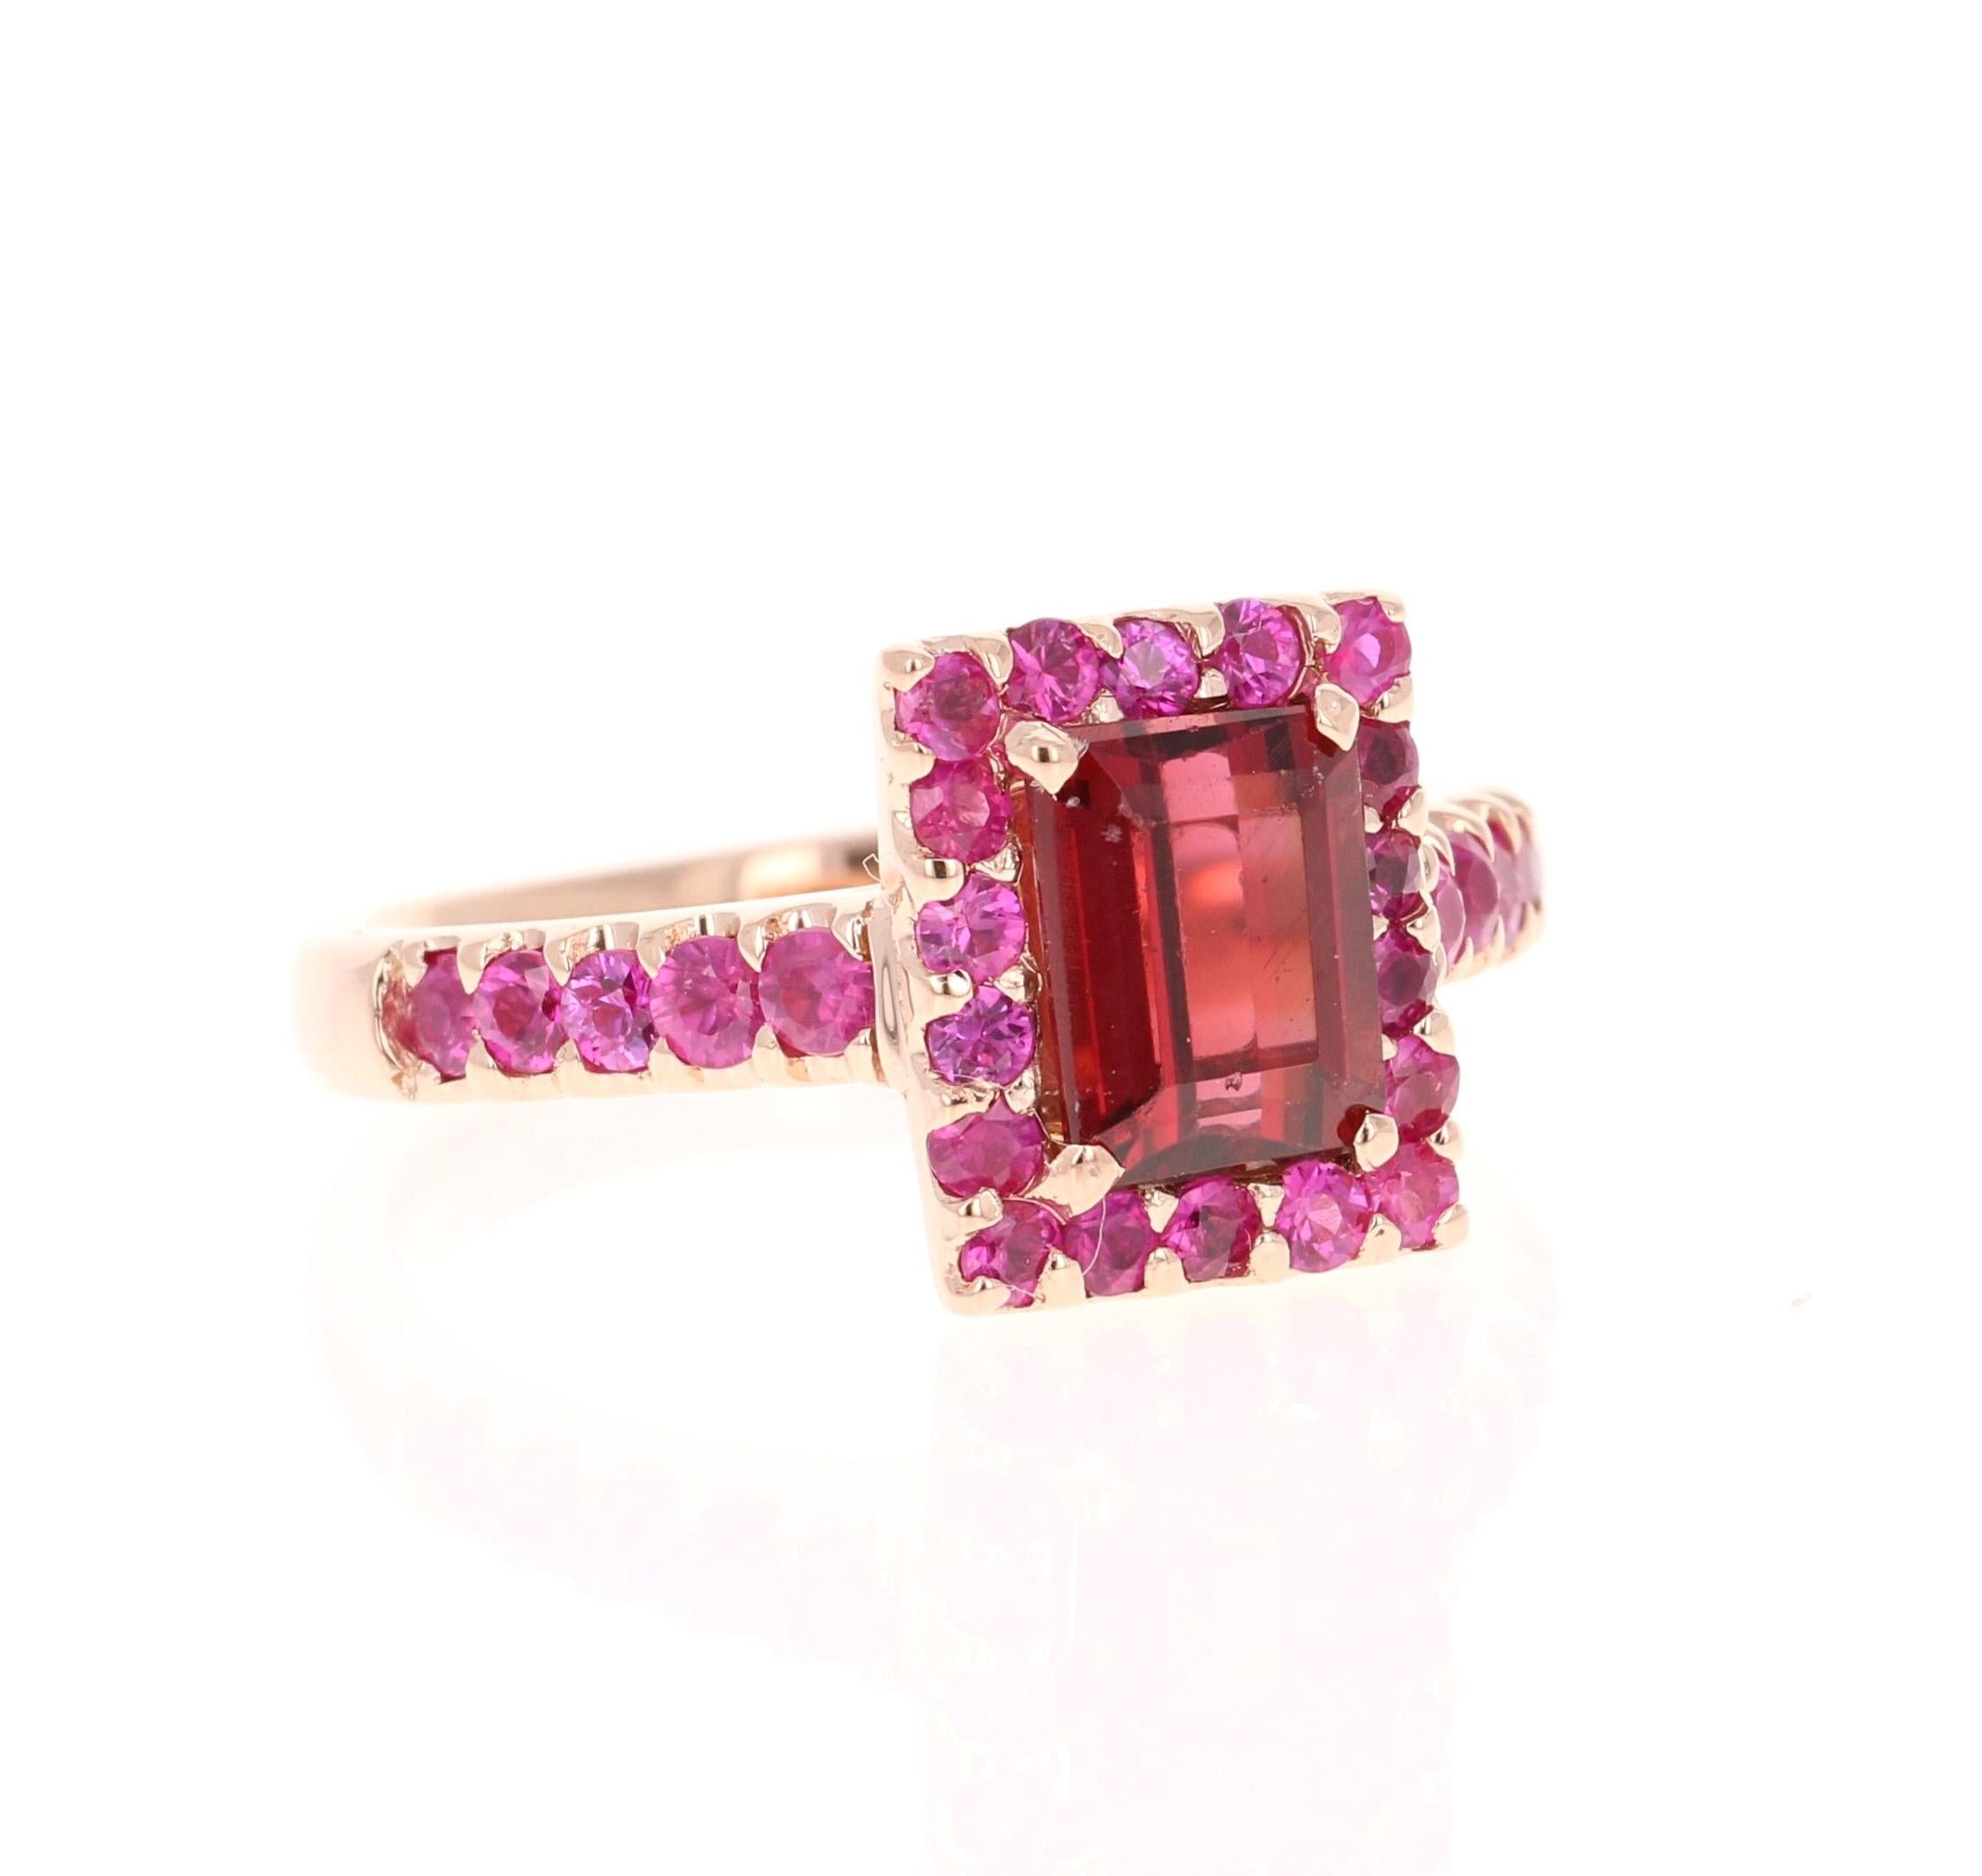 This ring has a Emerald Cut Hot Pink Tourmaline that weighs 2.08 Carats. Floating around the tourmaline are 28 Pink Sapphires that weigh 1.06 Carats. 
The total carat weight of the ring is 3.14 Carats. 
The Emerald Cut Tourmaline measures at 6 mm x